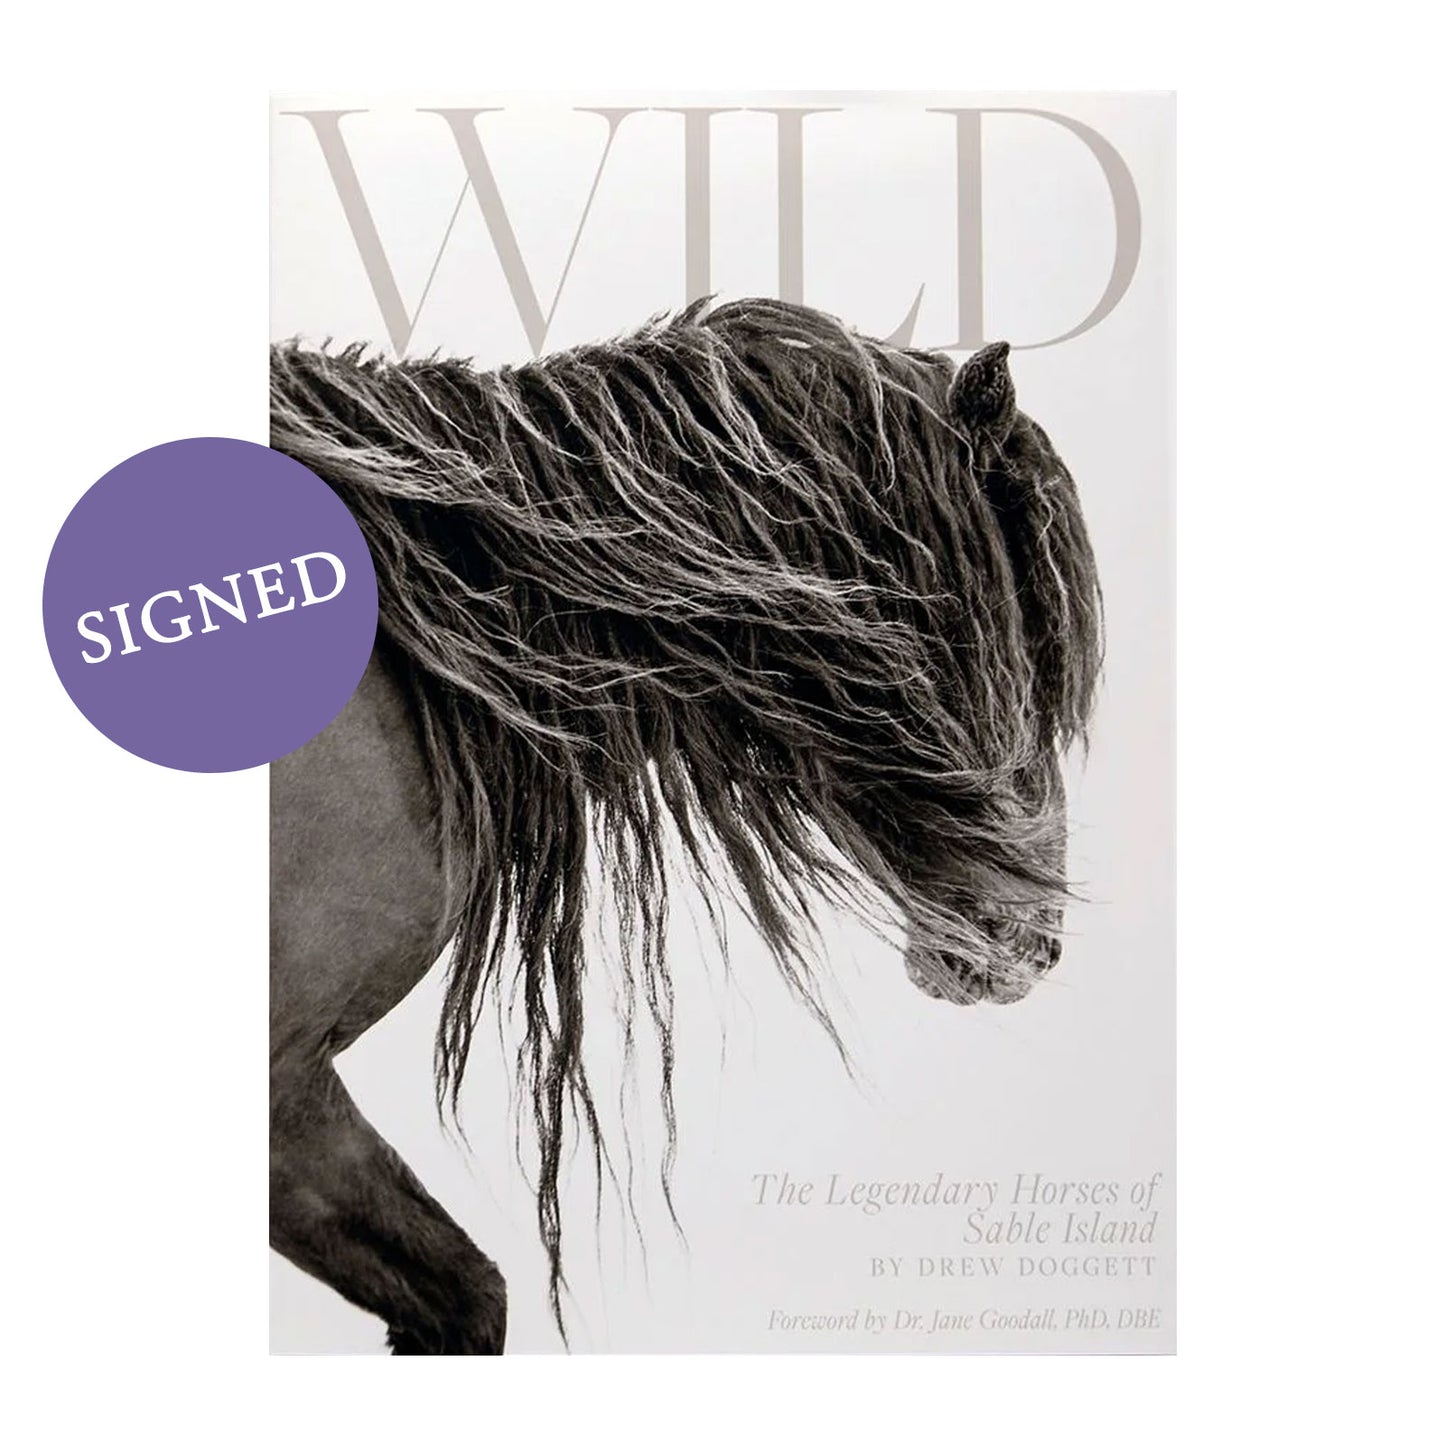 WILD: The Legendary Horses of Sable Island, Signed